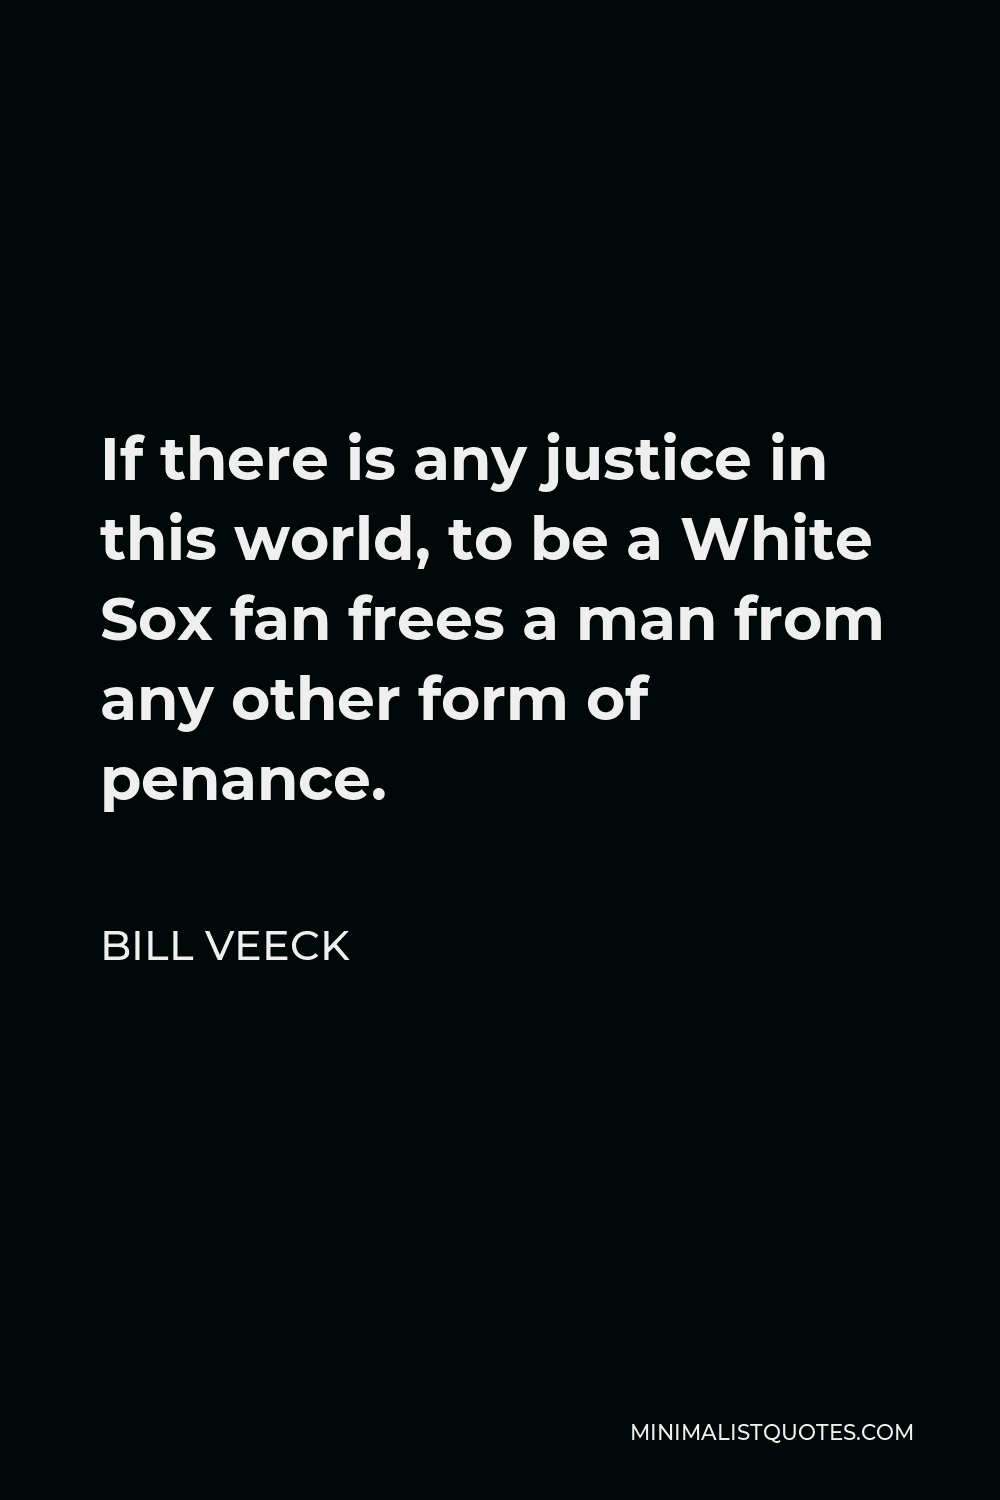 Bill Veeck Quote - If there is any justice in this world, to be a White Sox fan frees a man from any other form of penance.